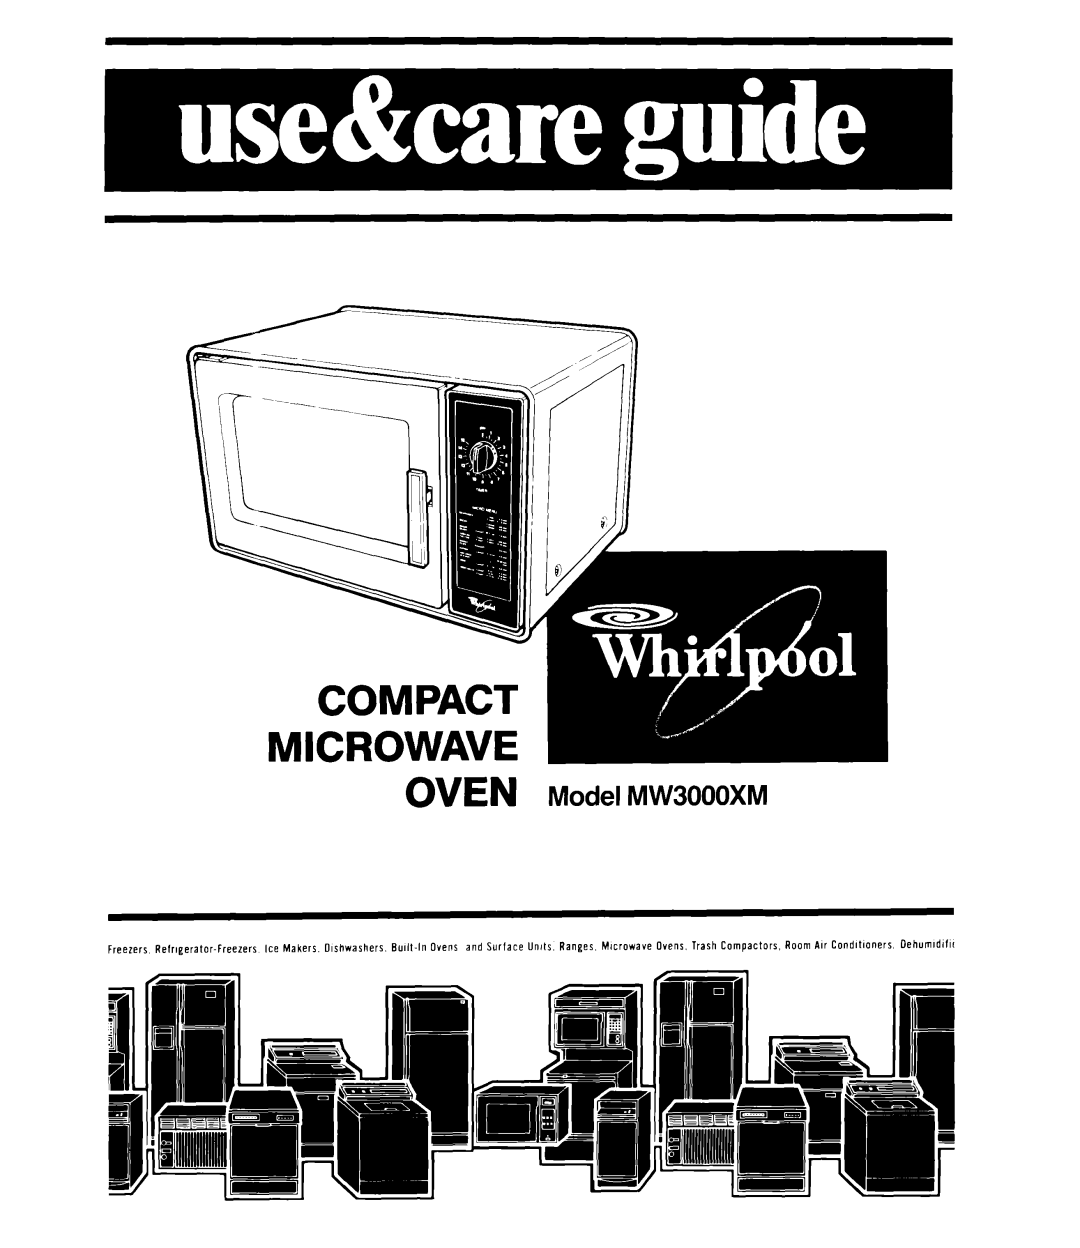 Whirlpool manual Compact Microwave, OVEN Model MW3000XM 